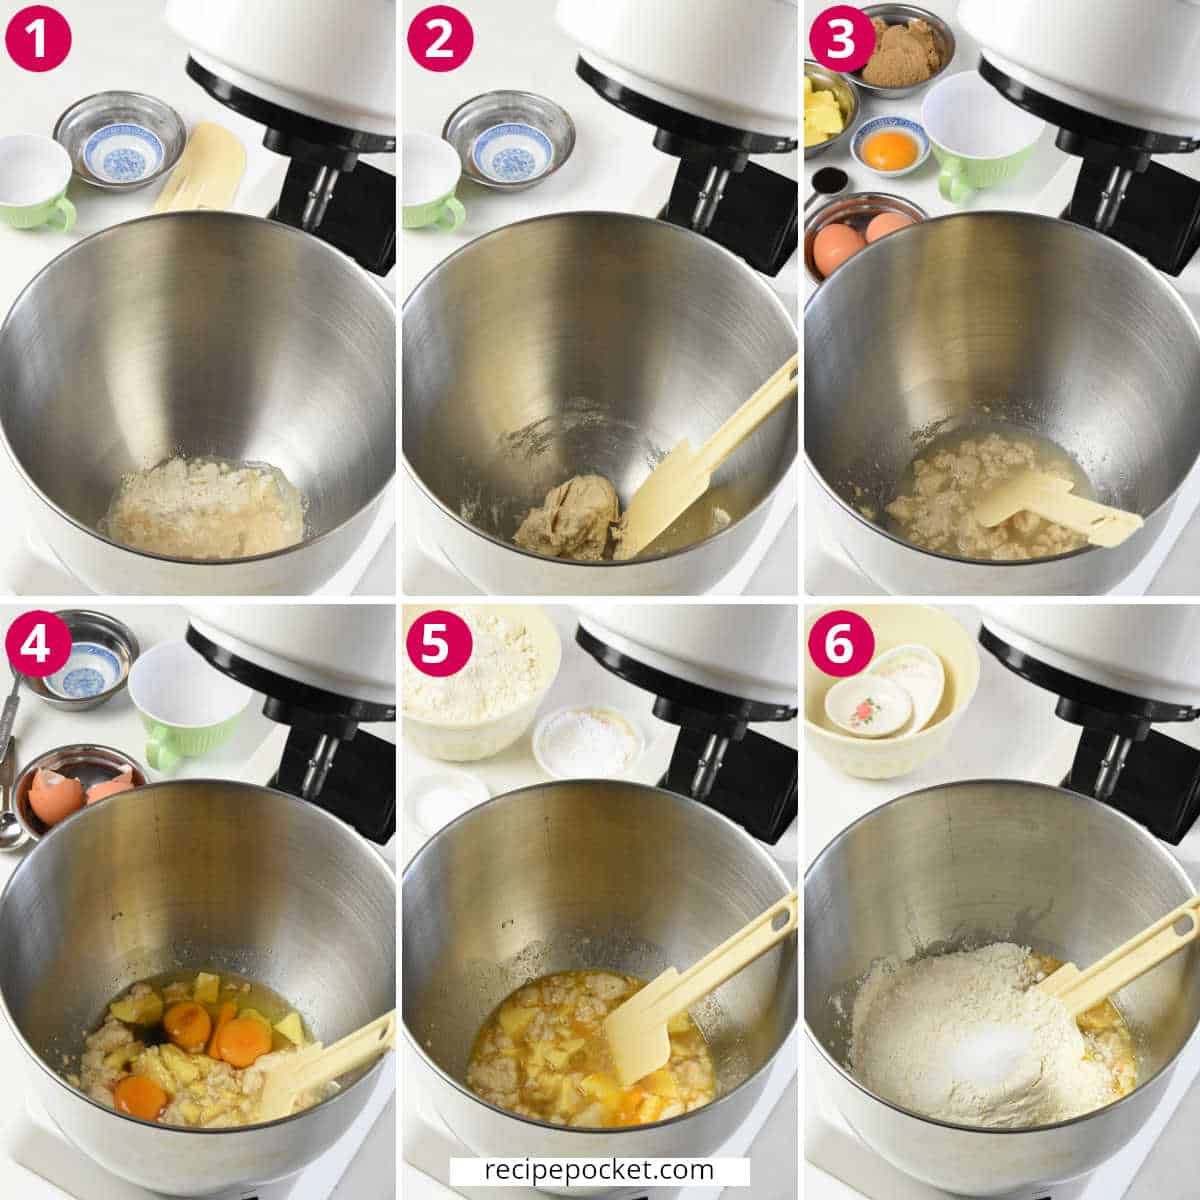 Six part image showing the first steps of make bread rolls in a stand mixer.